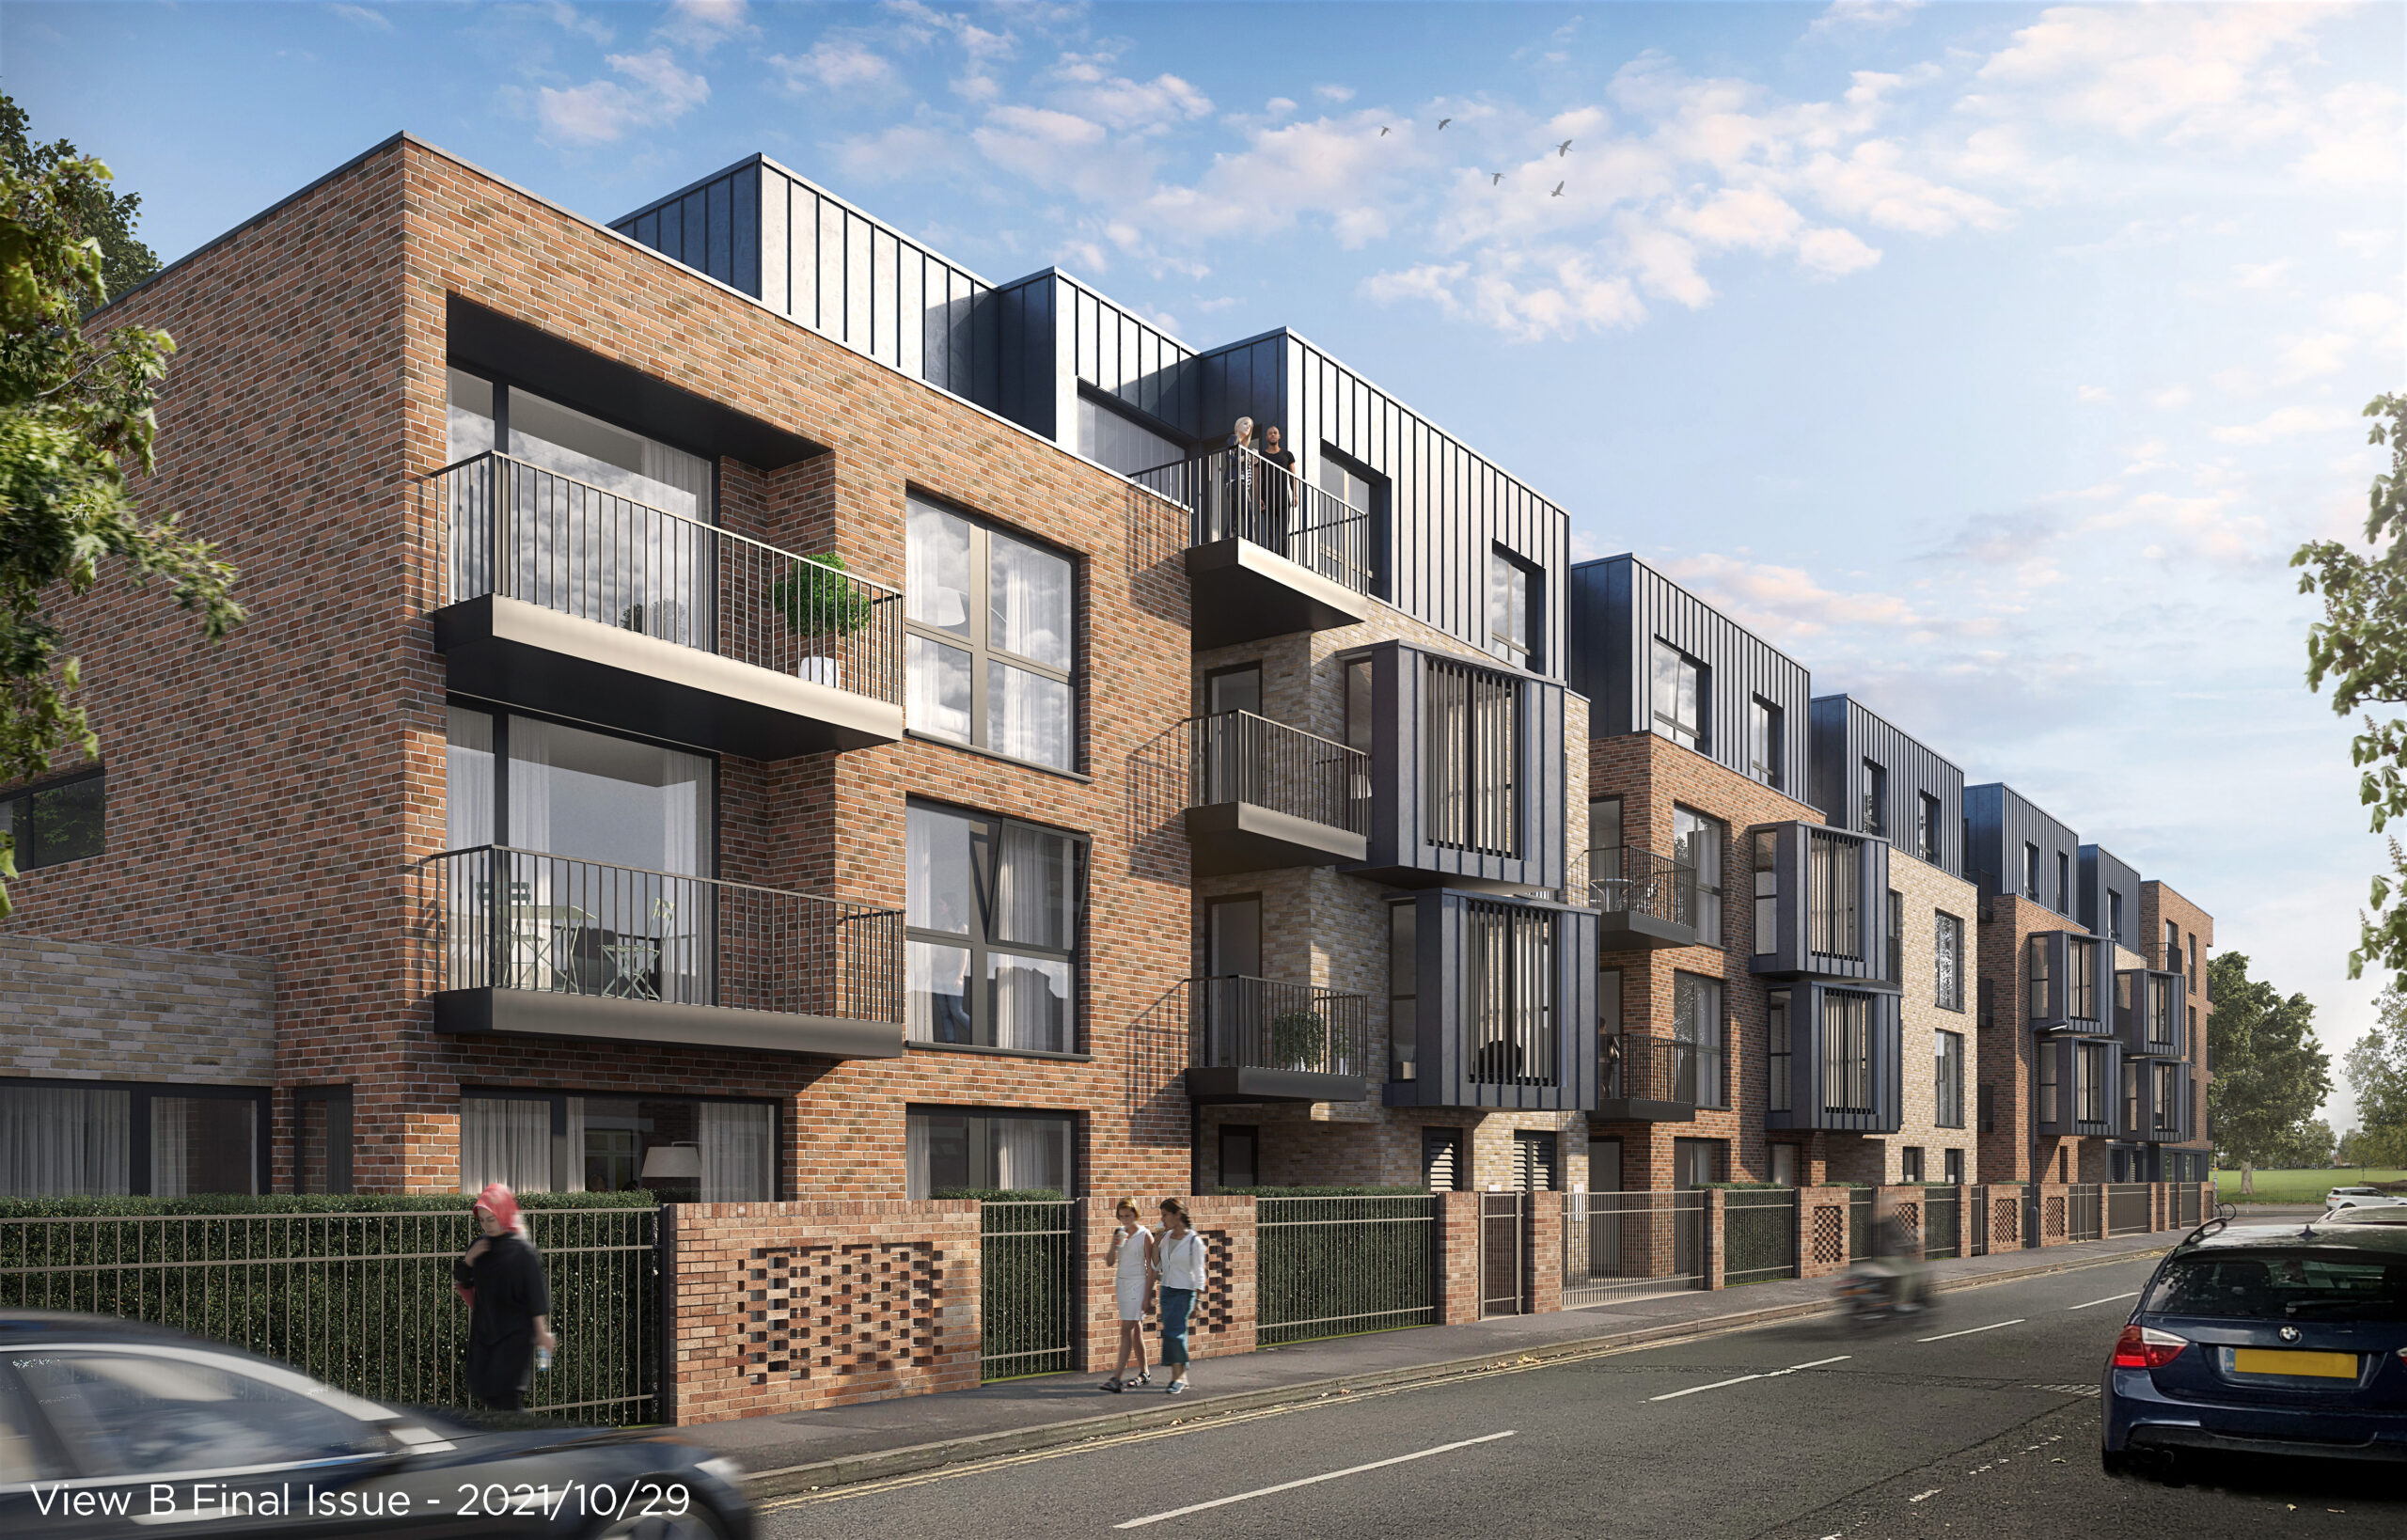 Image of the exterior of Arcadia View by Southern Housing New Homes - Start your property journey on Share to Buy!